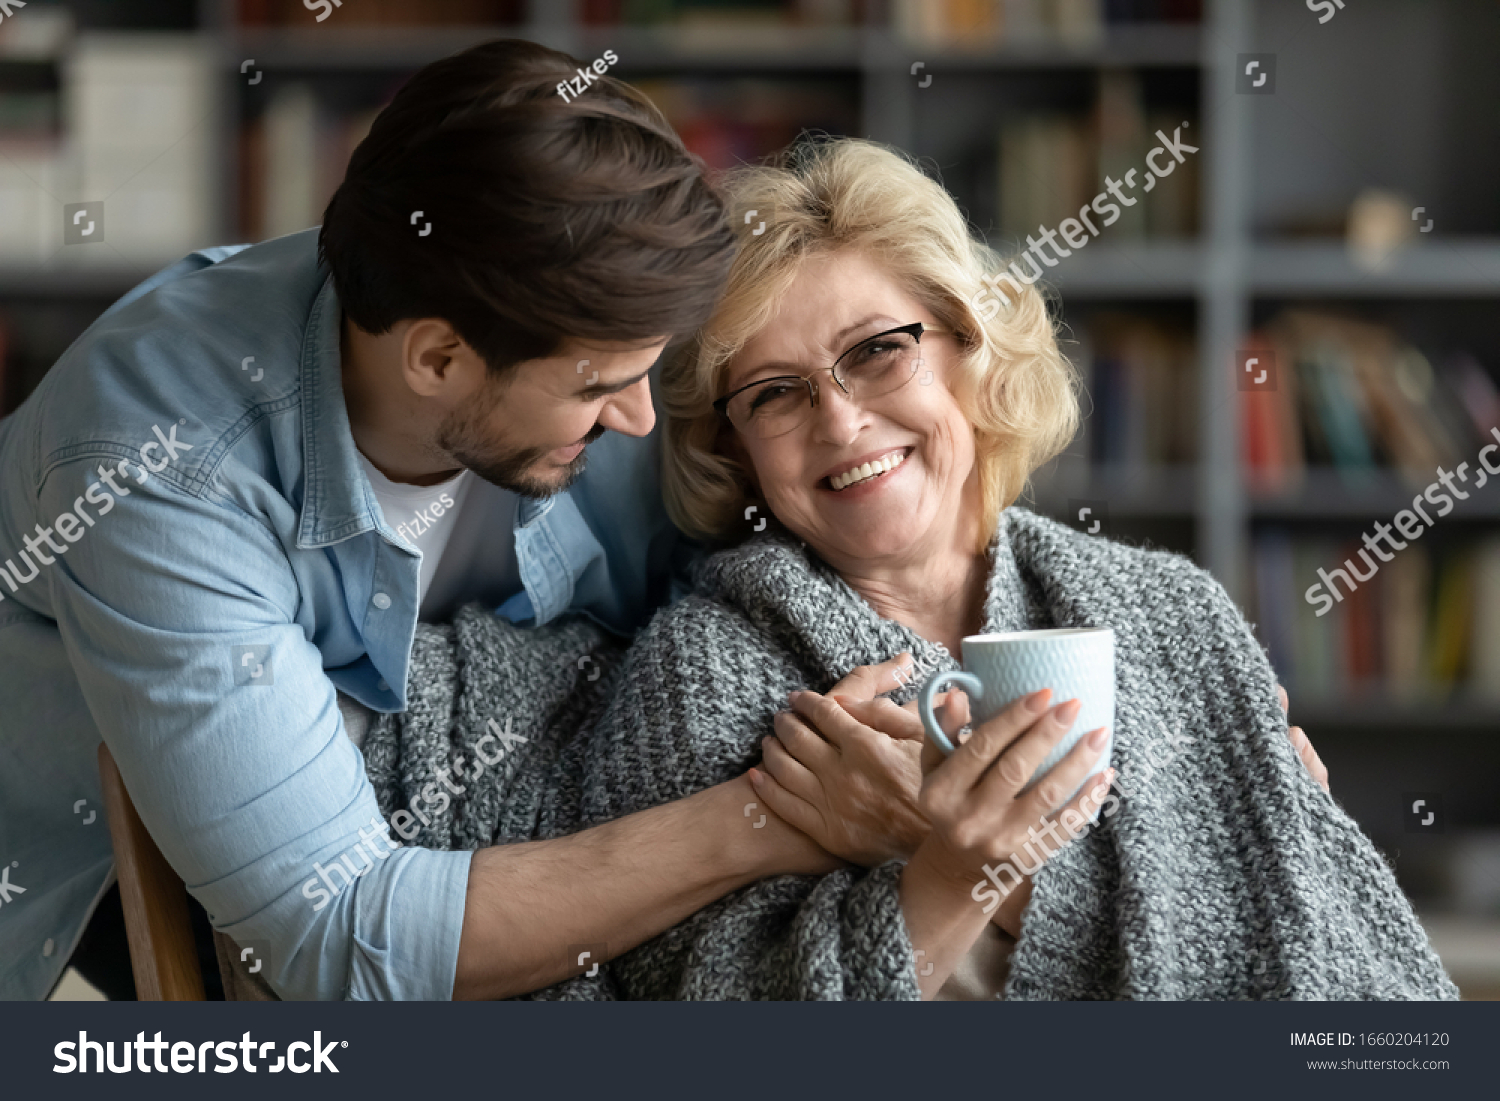 Happy middle-aged mother relax in chair drink tea enjoy family weekend reunion with grown-up son, smiling senior 70s mom rest at home spend time with caring adult man child, bonding concept #1660204120